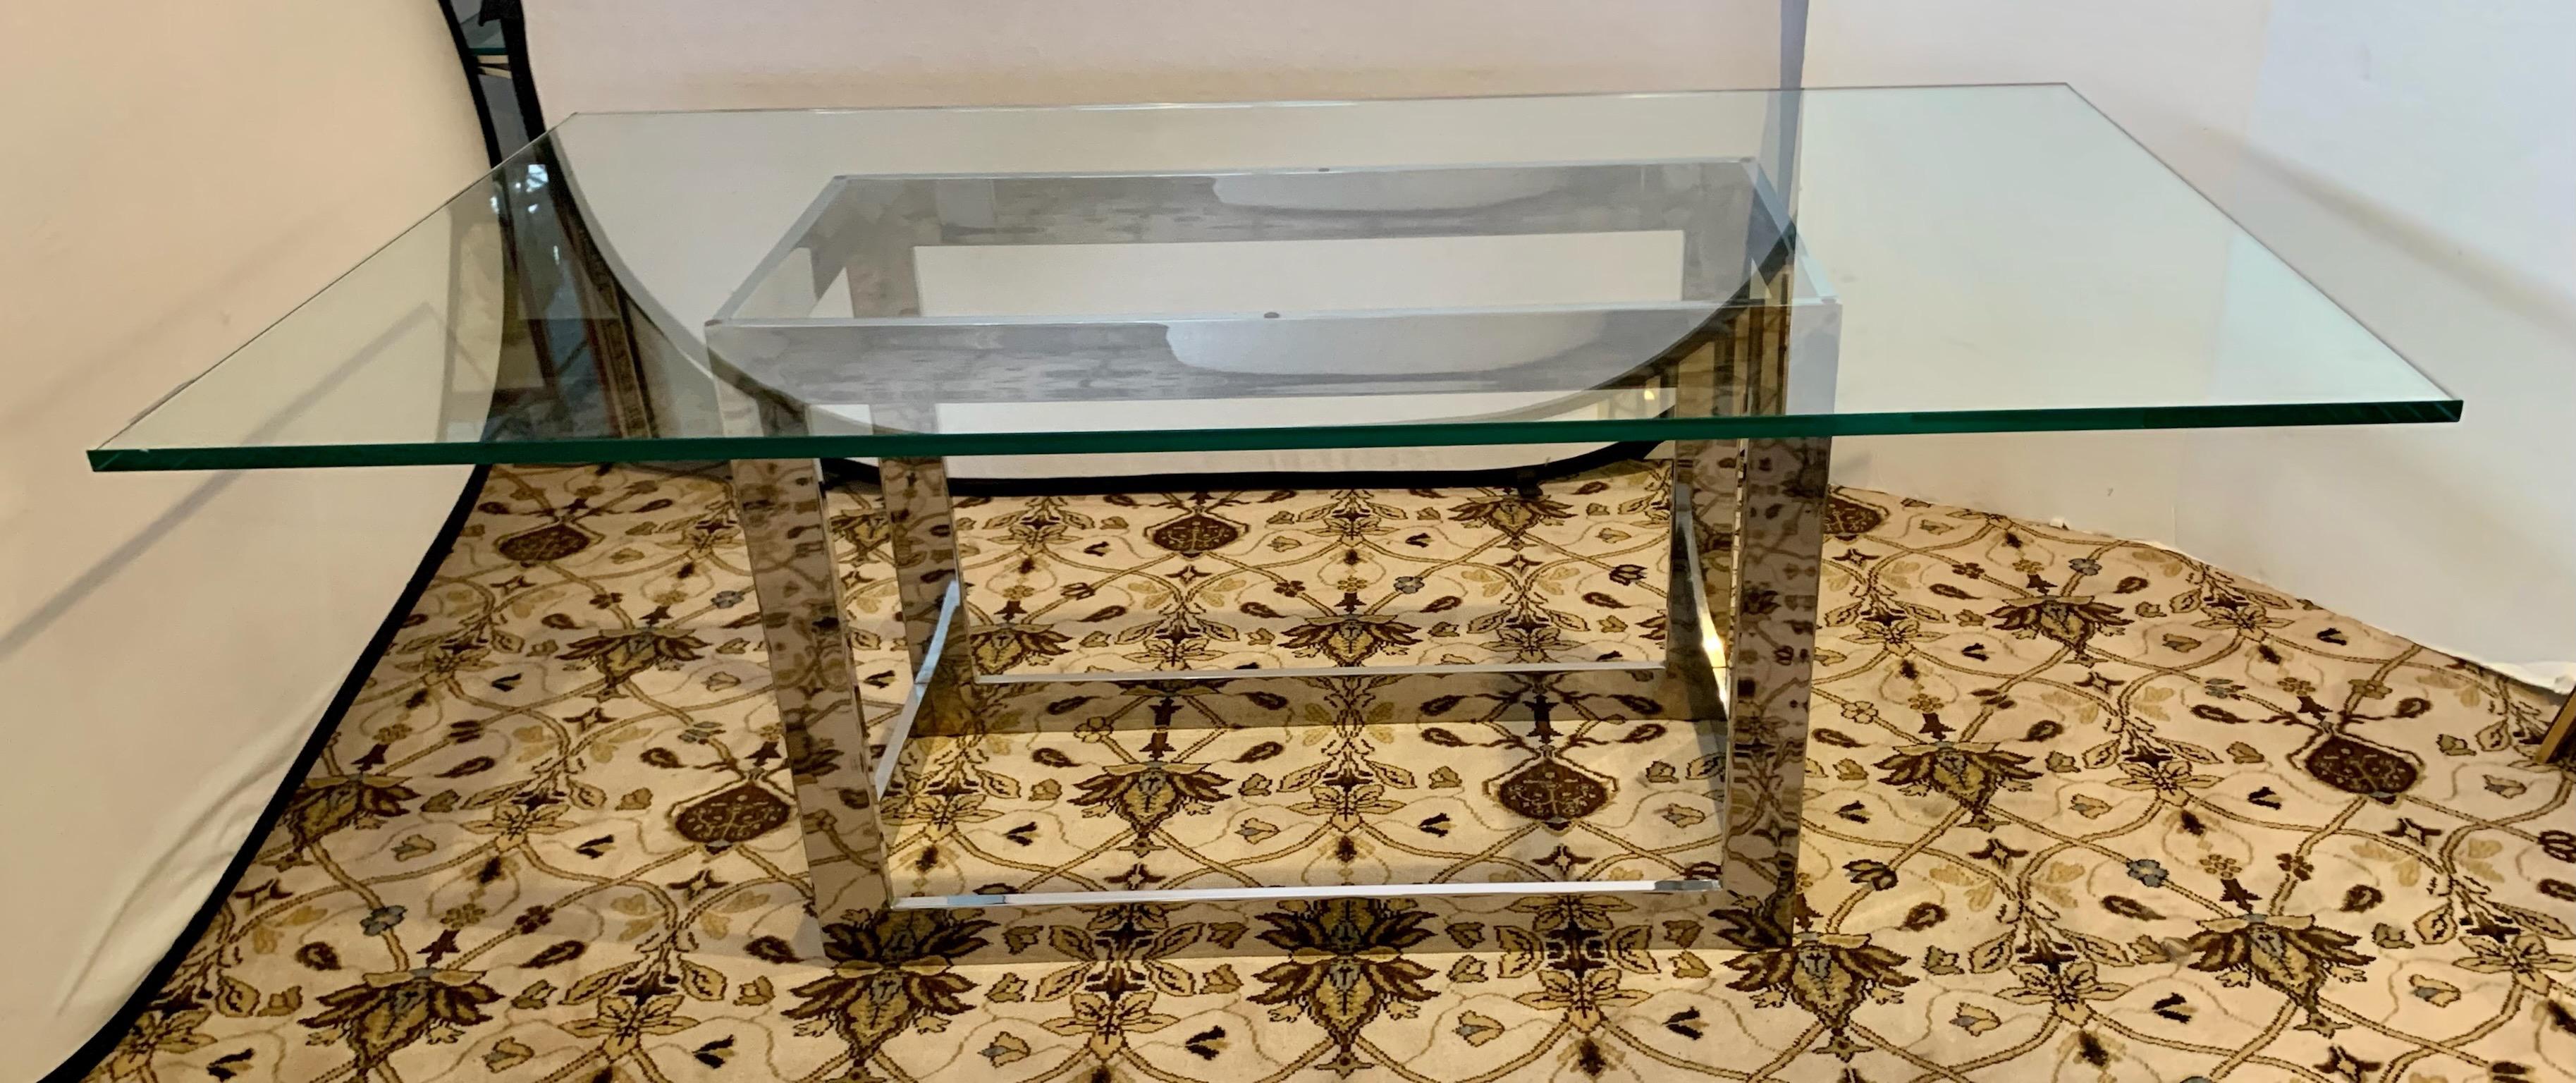 Magnificent, iconic Milo Baughman thick glass and chrome dining table in mint condition. Great scale and better lines. All dimensions are below. Measures: 72